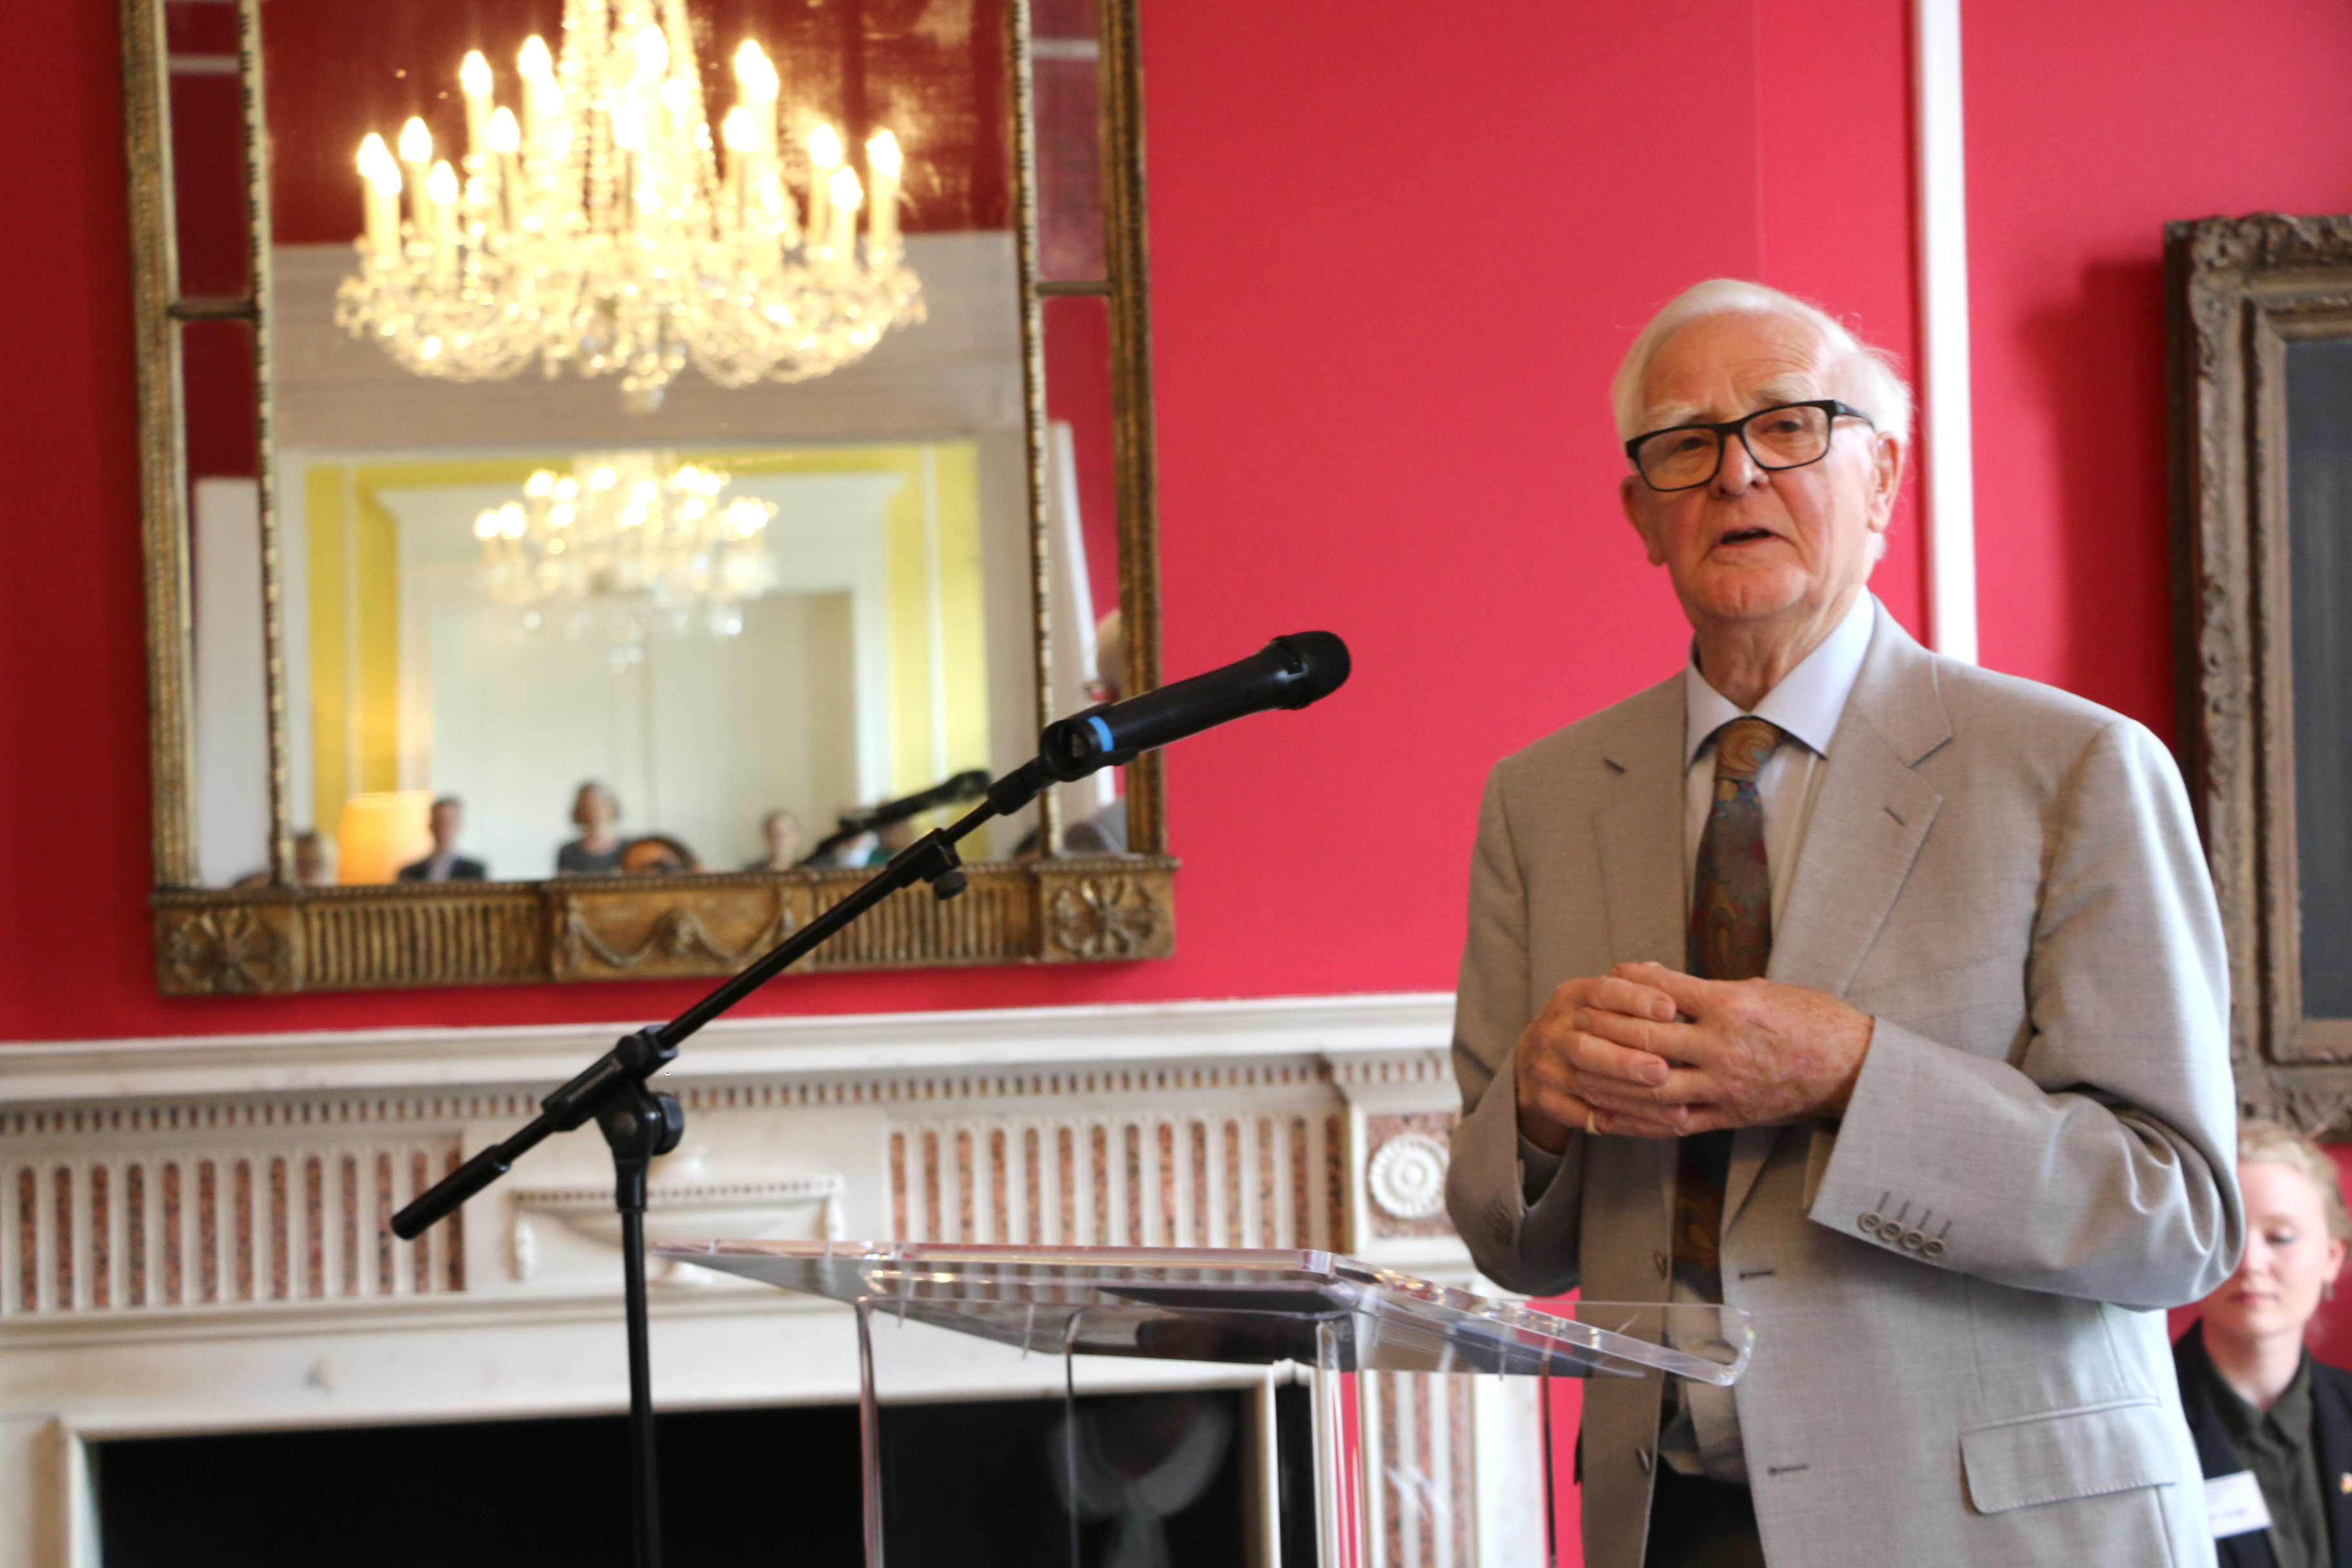 Author John le Carré speaking at the German Embassy in London in June 2017.